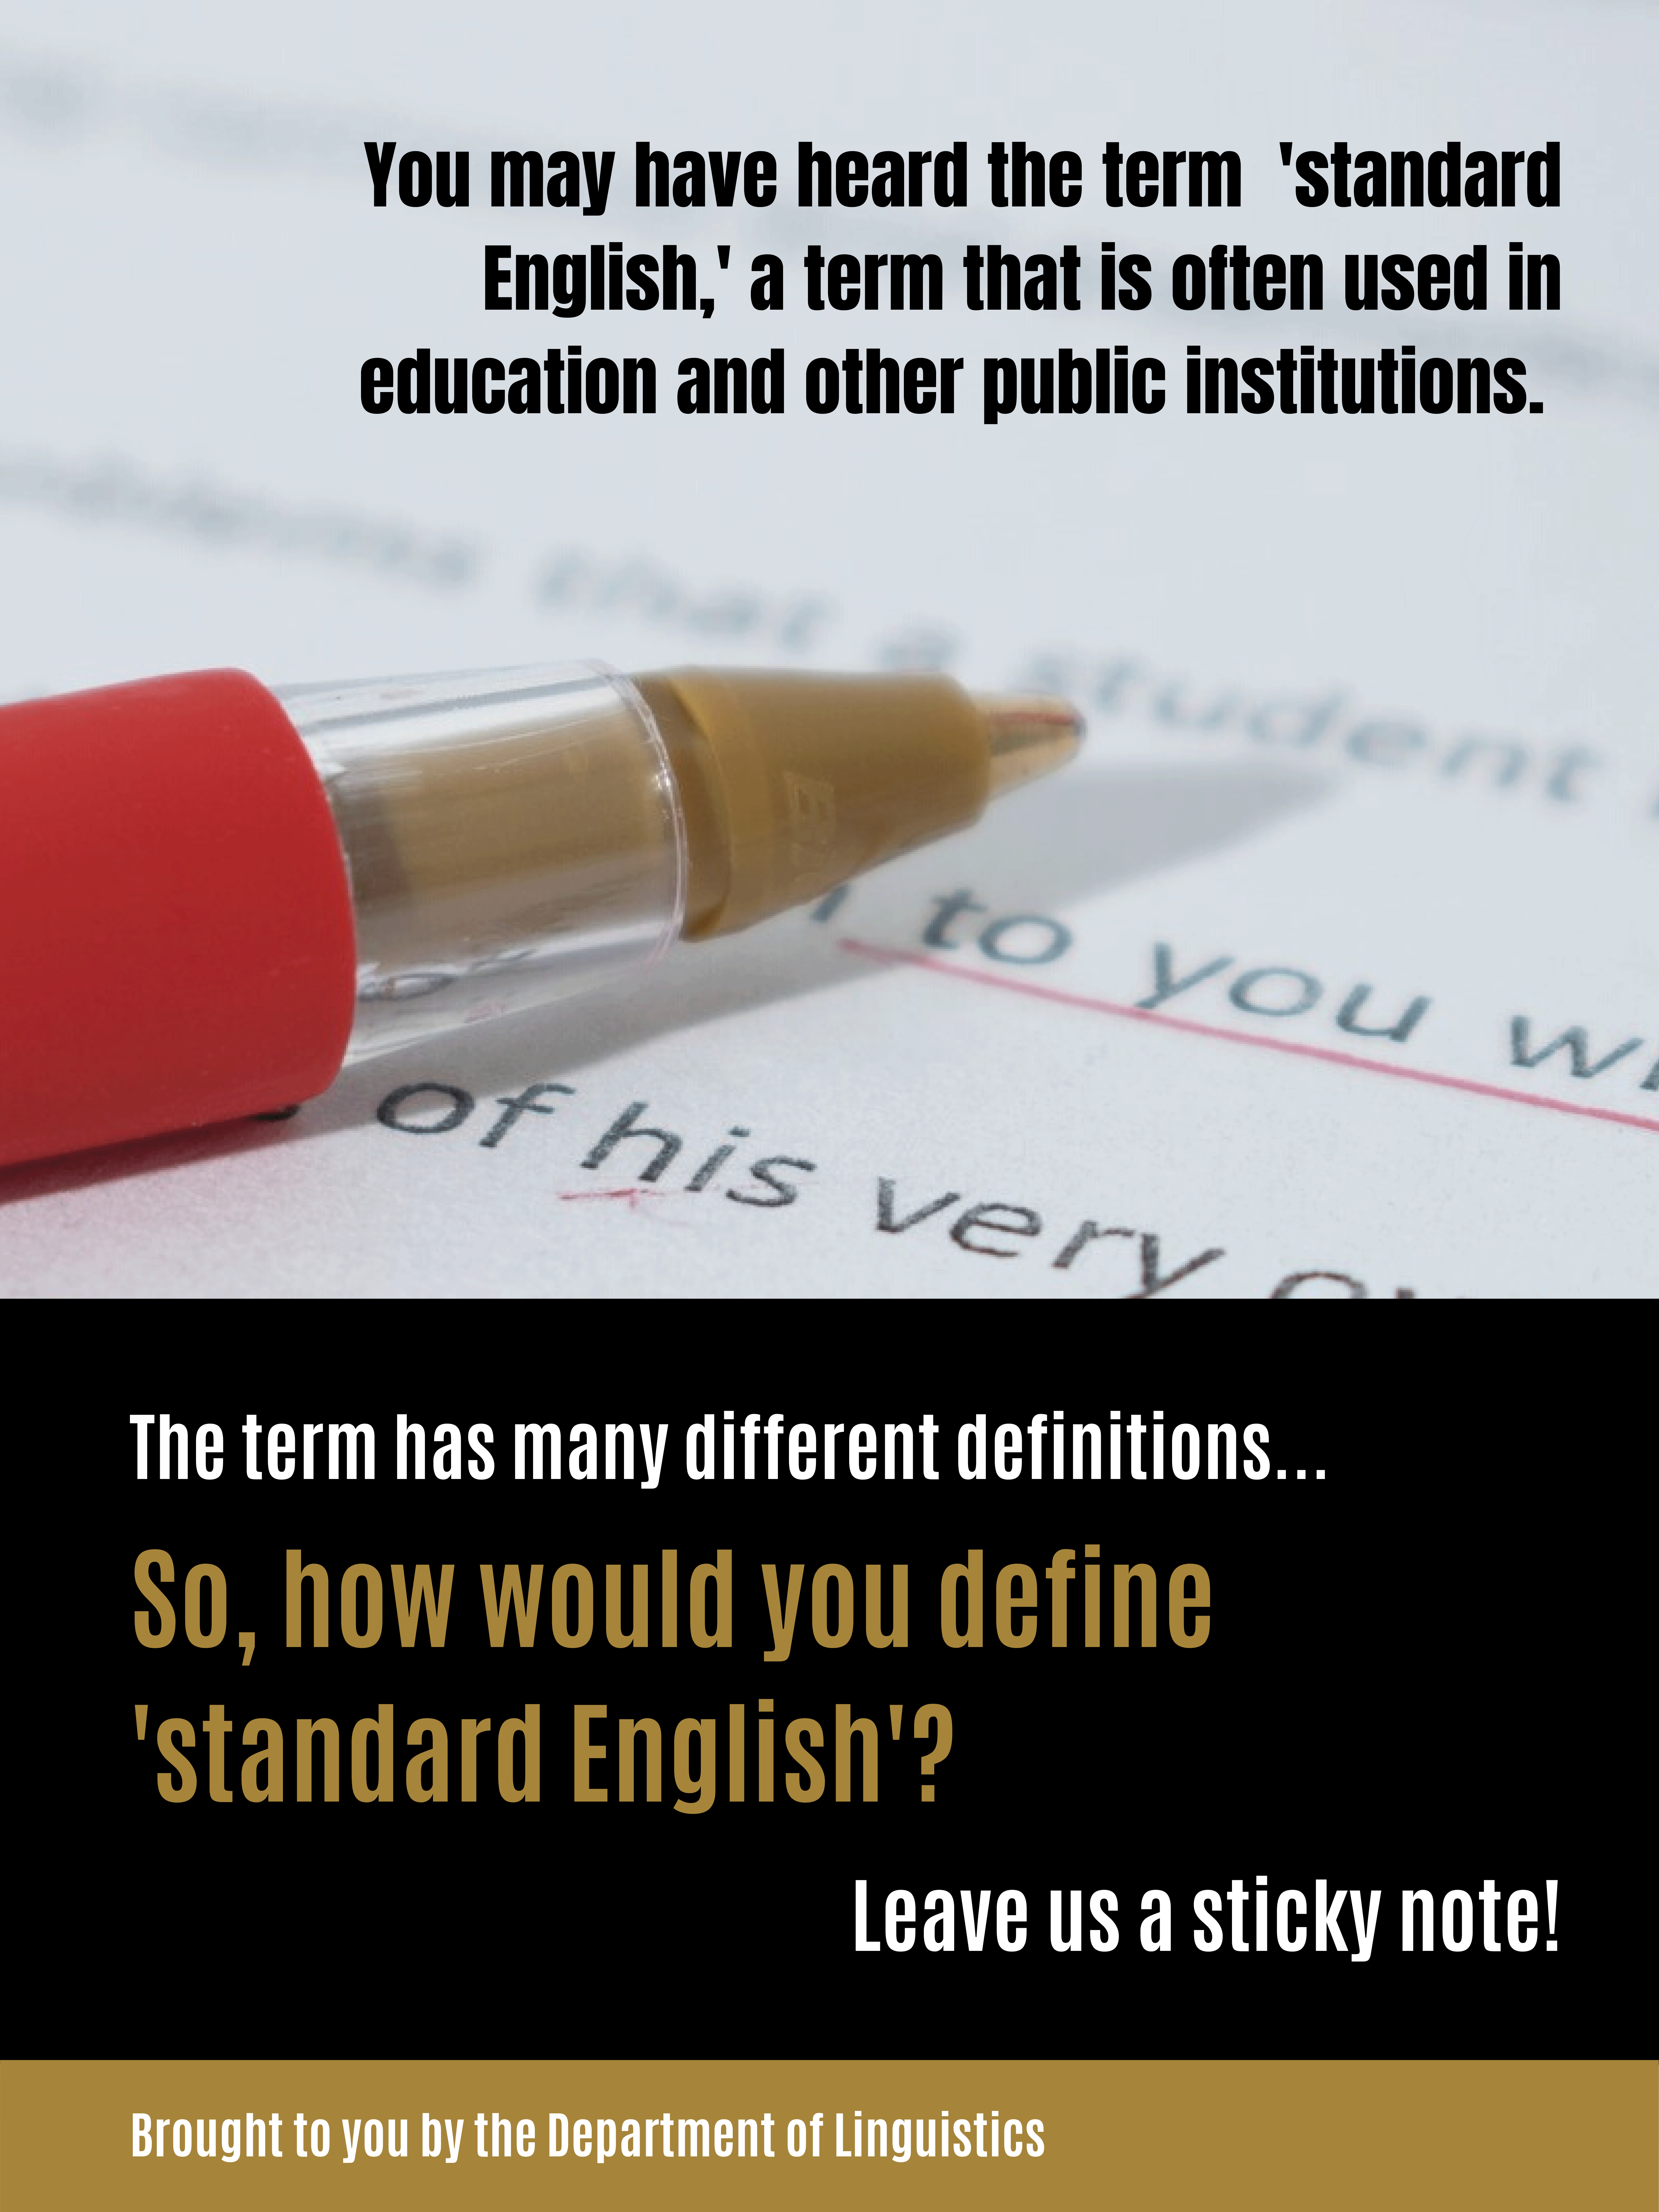 Linguistics Poster. How would you define 'standard English'? See webpage for full description.